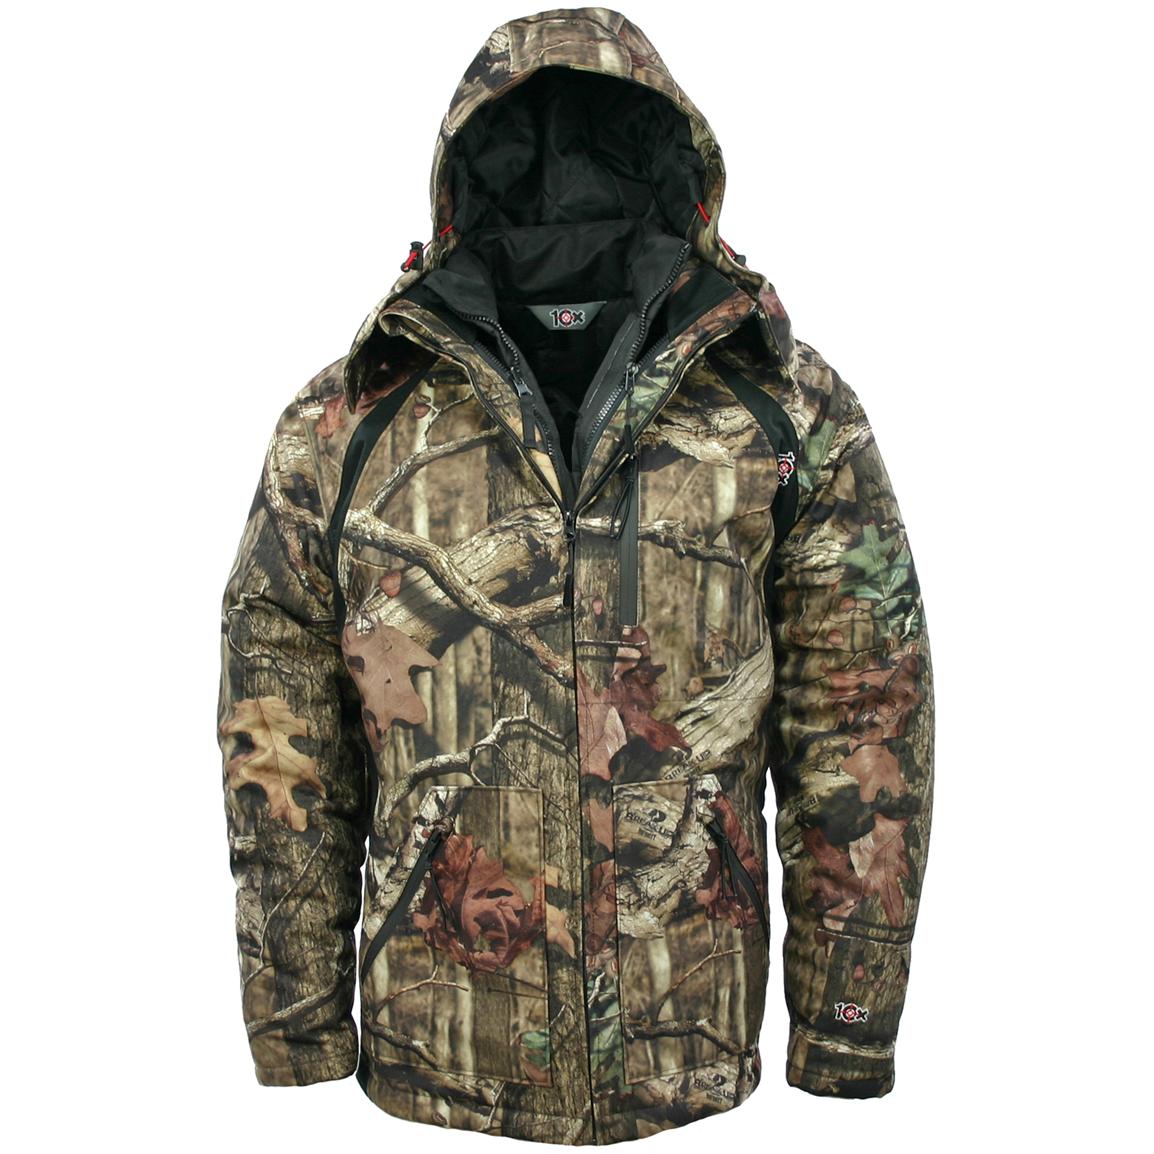 Walls® 10X® Thinsulate™ Insulation Outer Systems Jacket - 297363, Camo ...